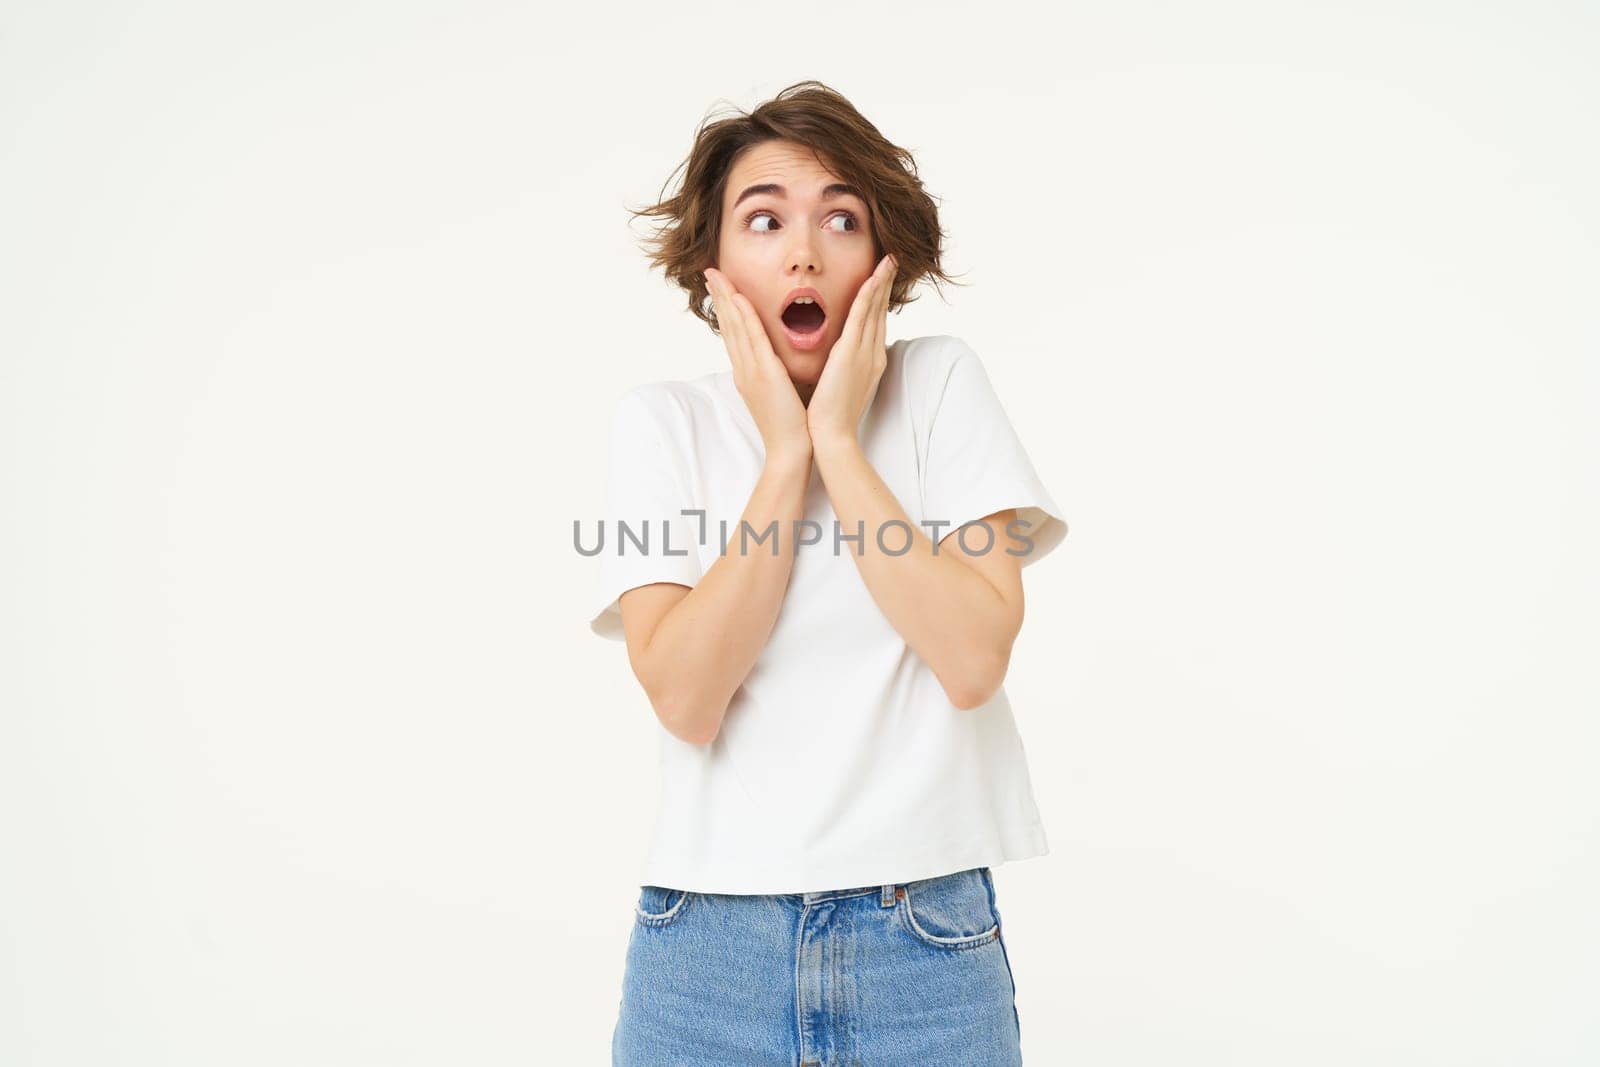 Portrait of screaming girl, holding hands on face, looks shocked and startled by something terrifying, standing over white background. copy space